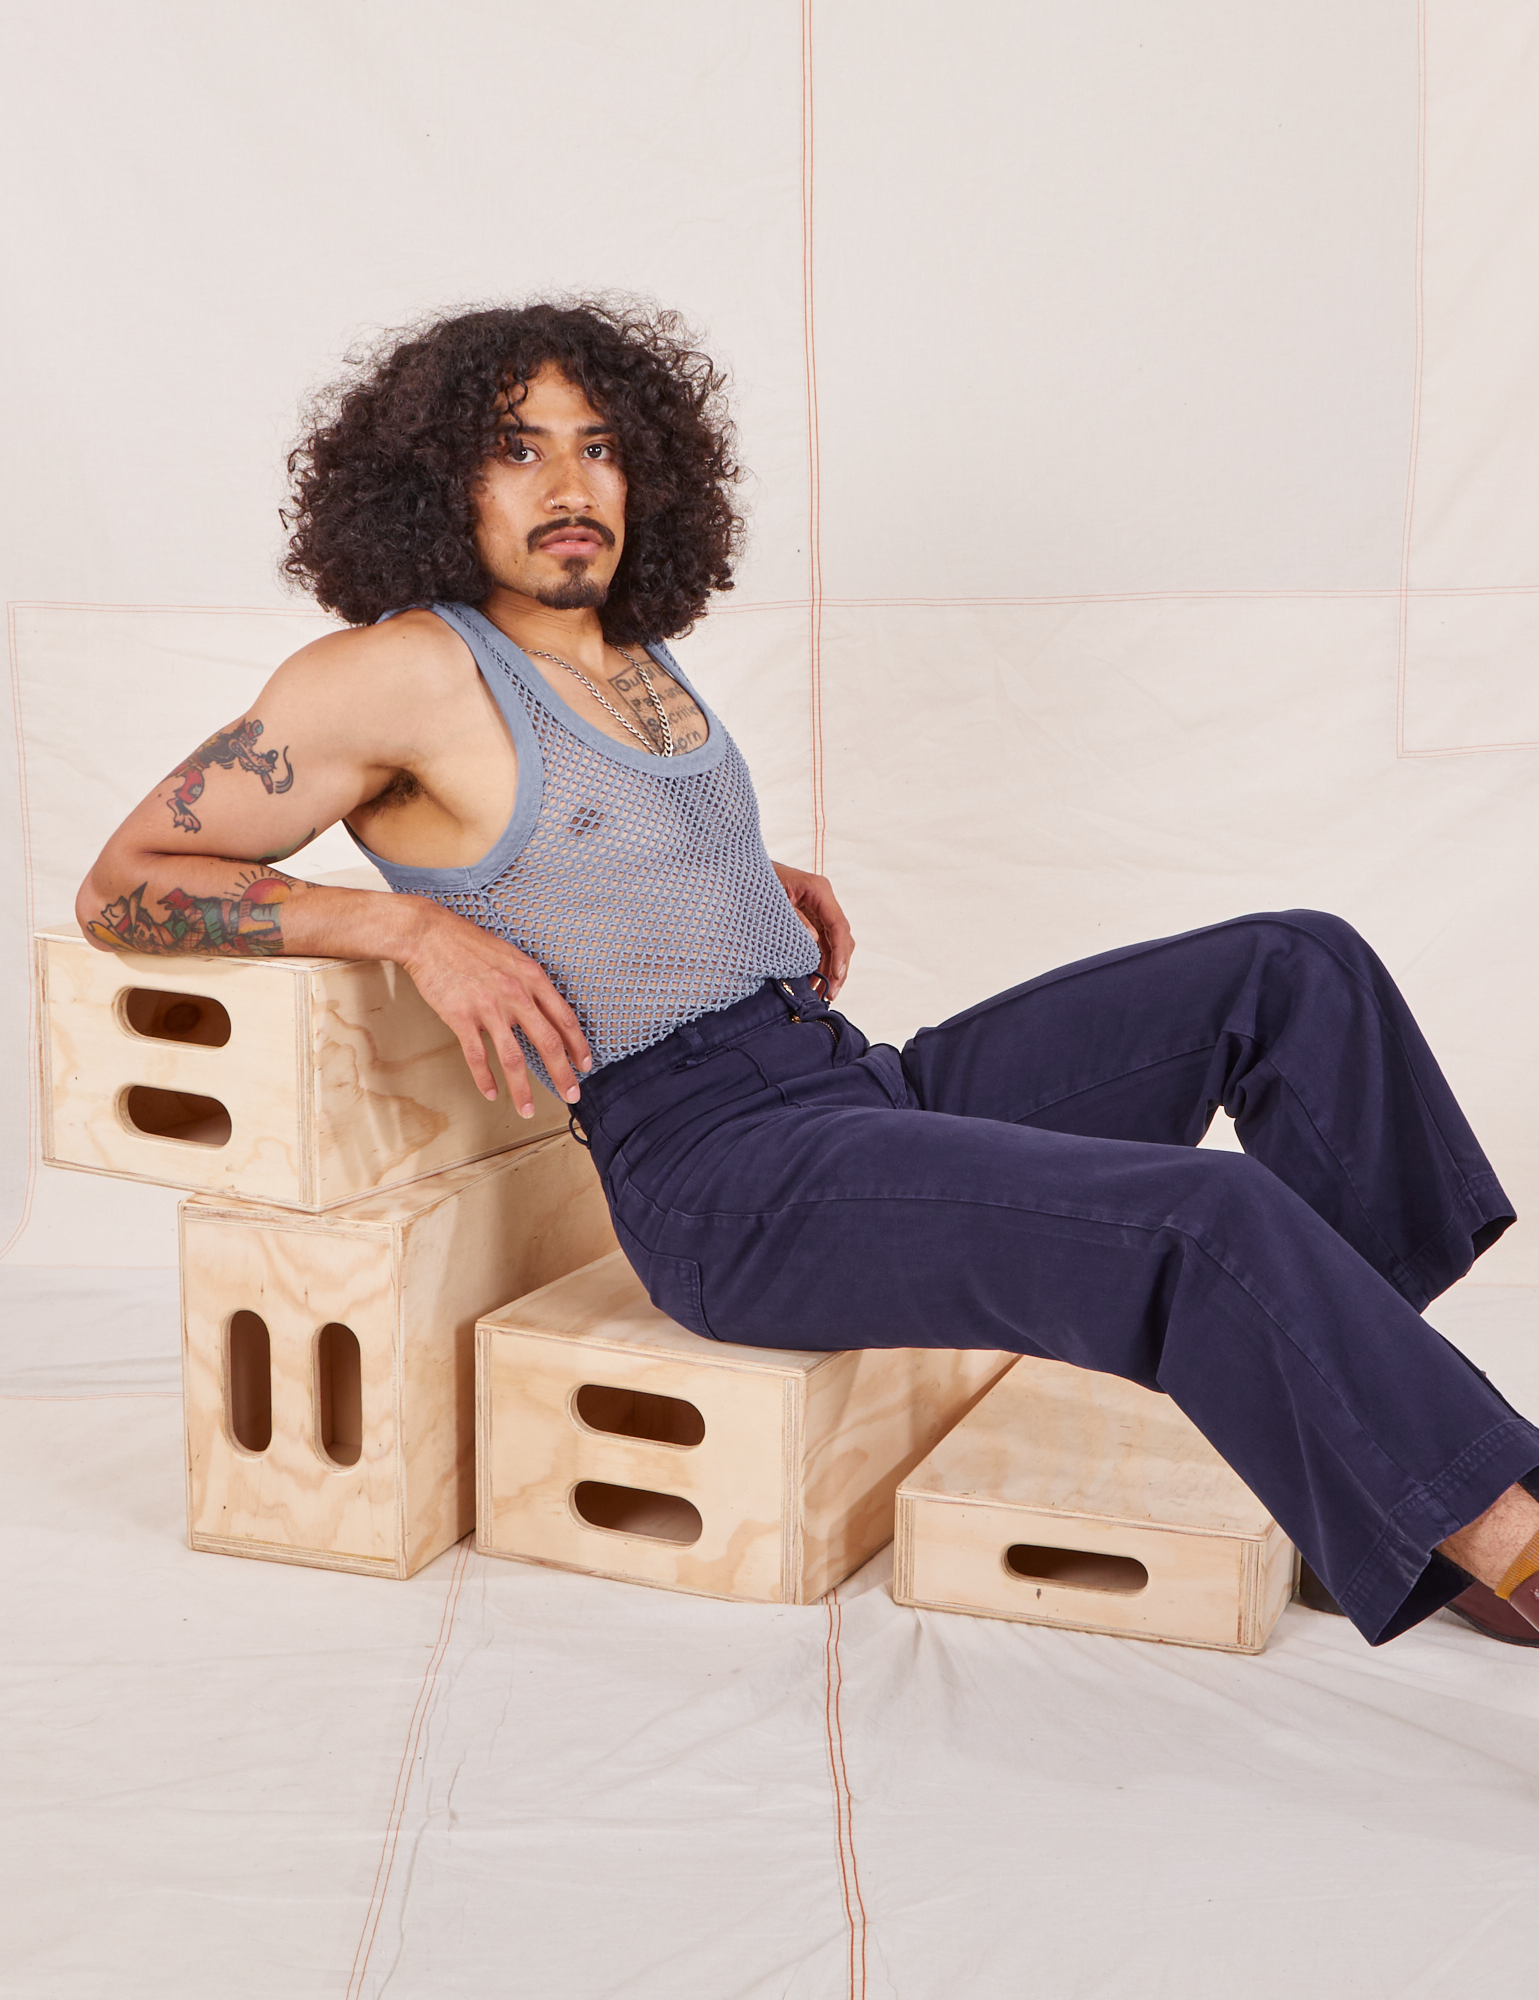 Jesse is sitting on a wooden crate wearing Mesh Tank Top in Periwinkle and navy Western Pants